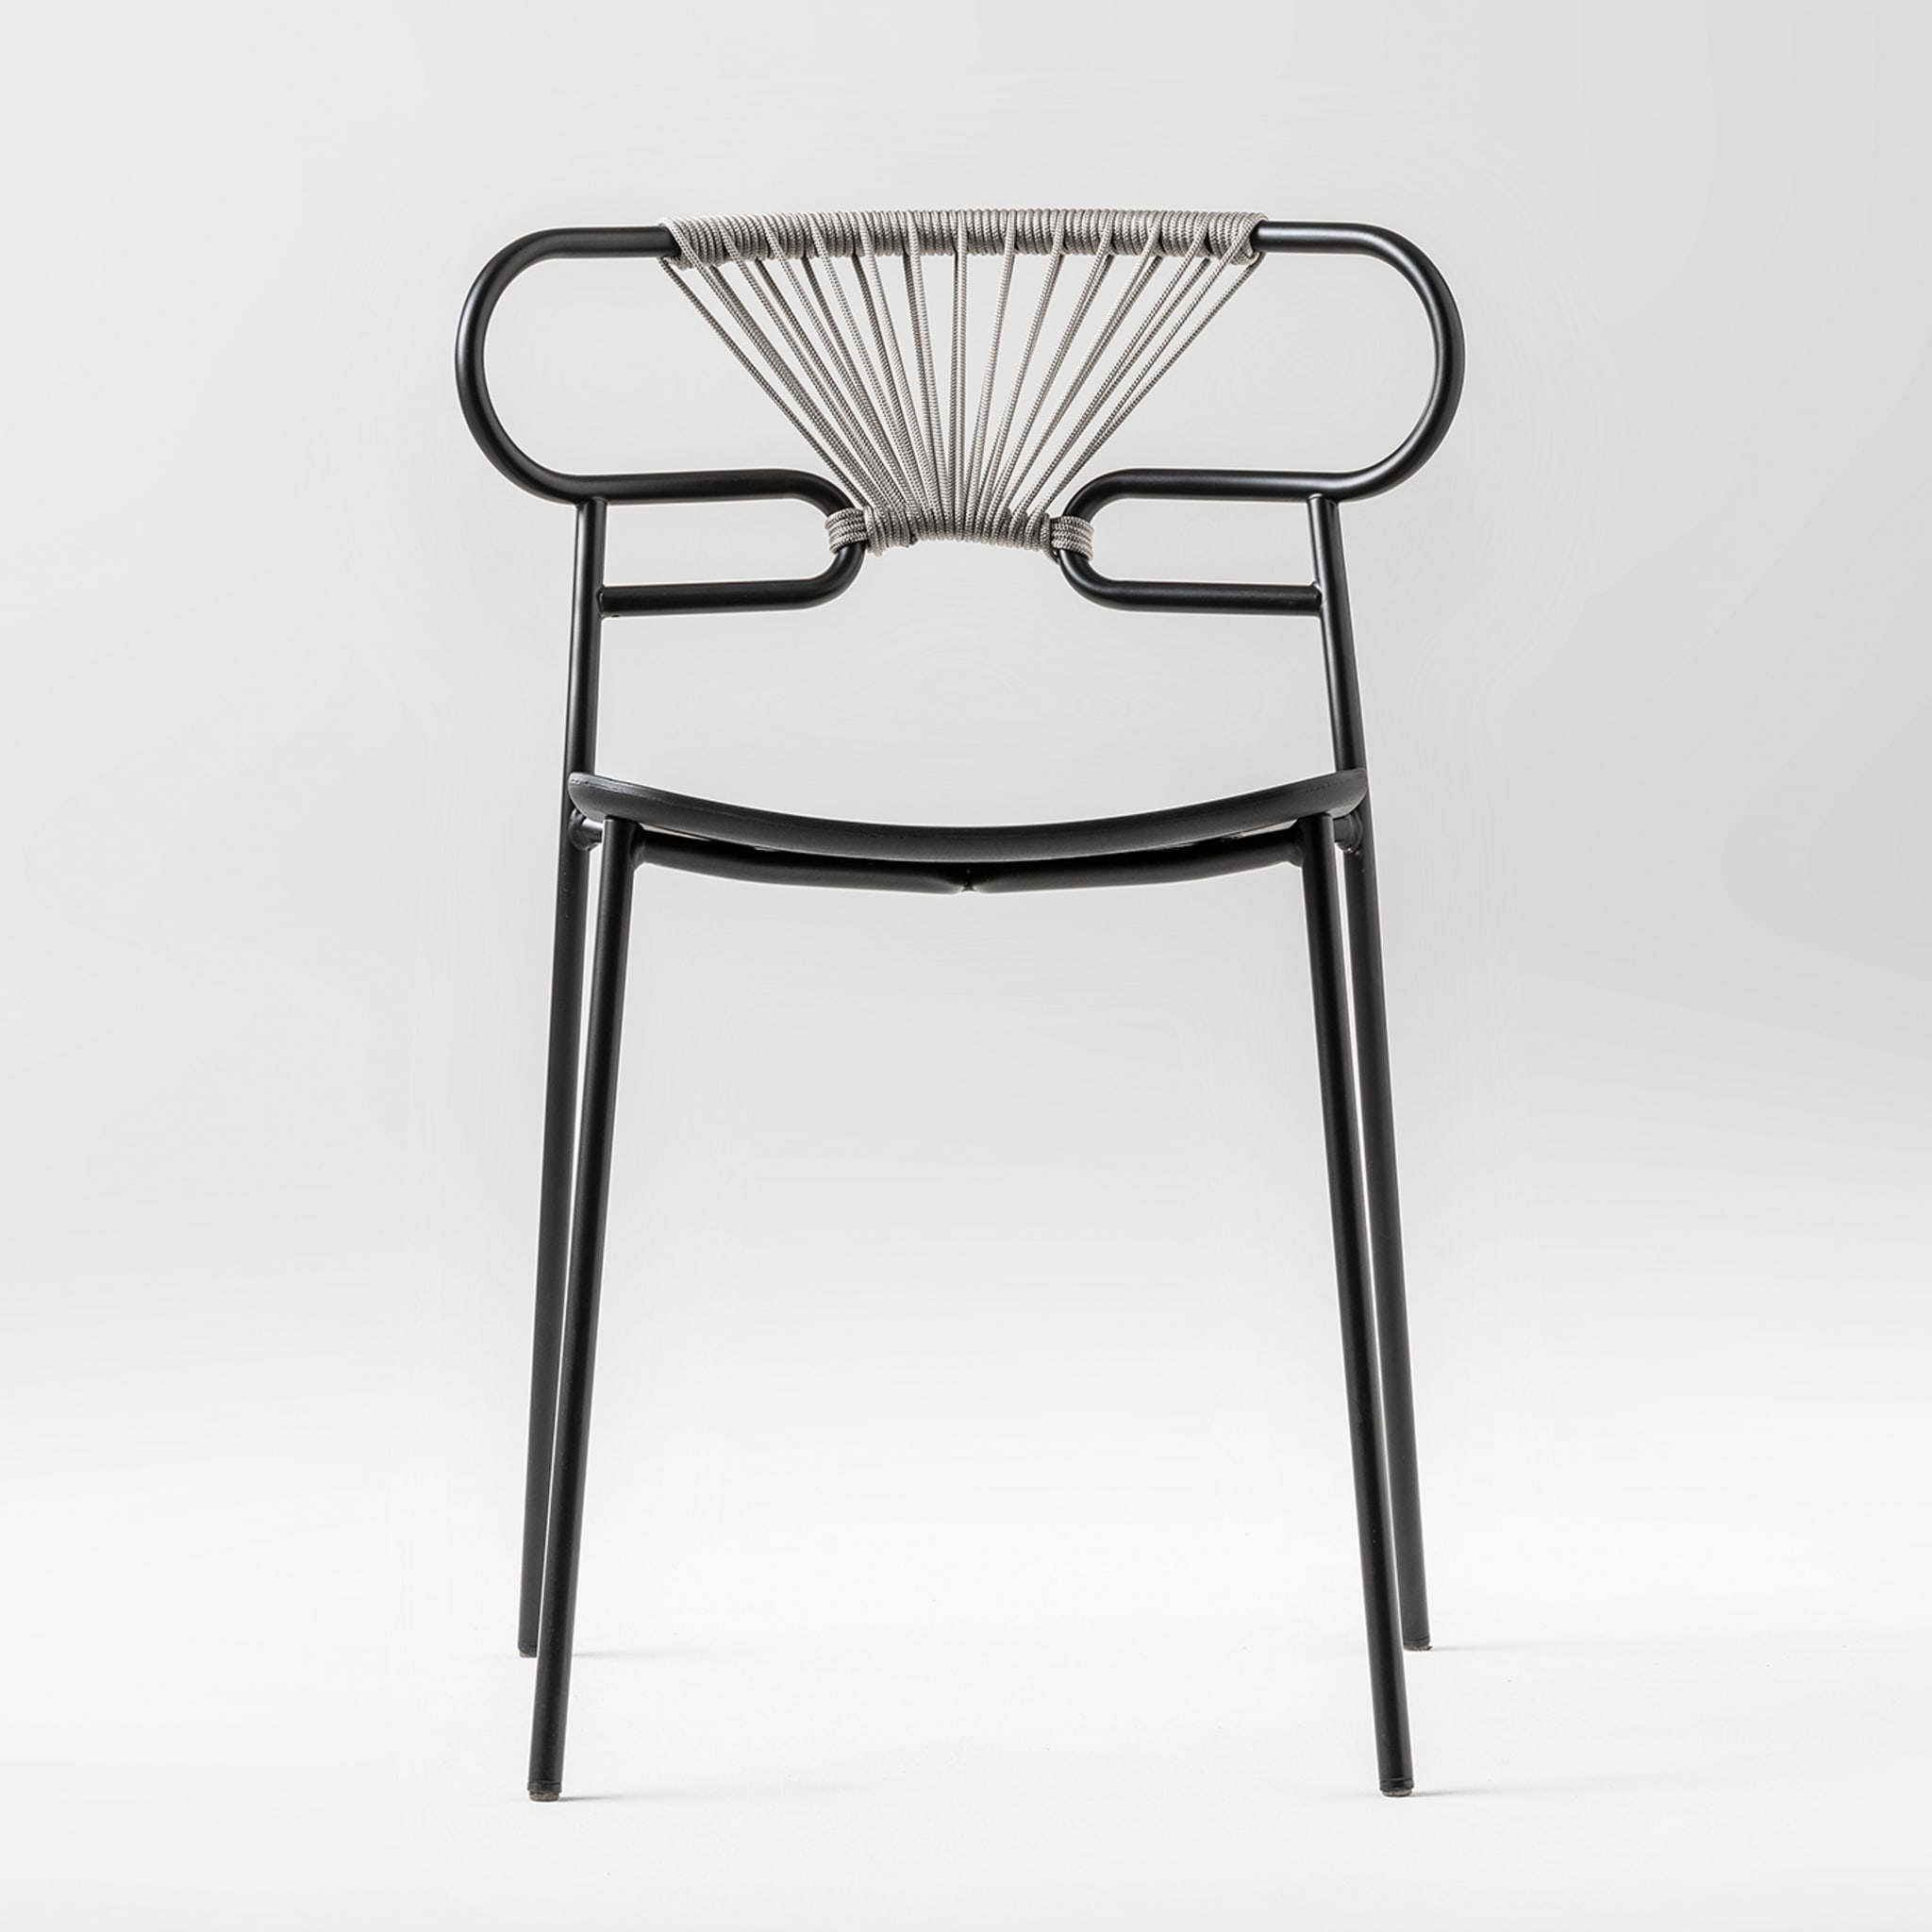 Genoa Chair with Gray Rope #2 by Cesare Ehr - Alternative view 3